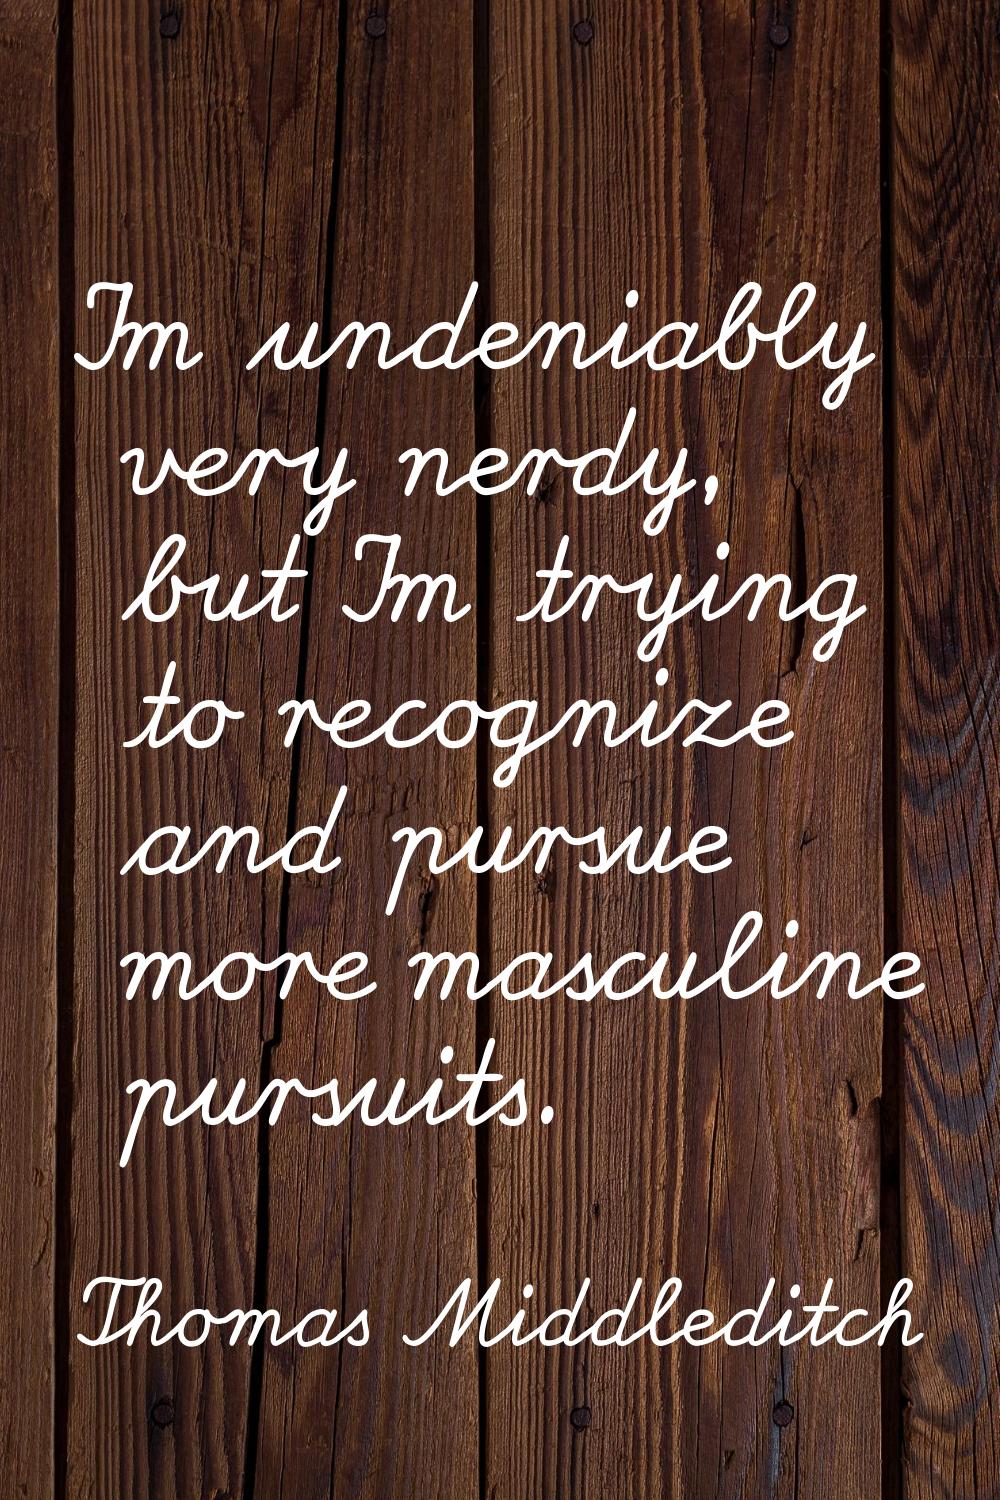 I'm undeniably very nerdy, but I'm trying to recognize and pursue more masculine pursuits.